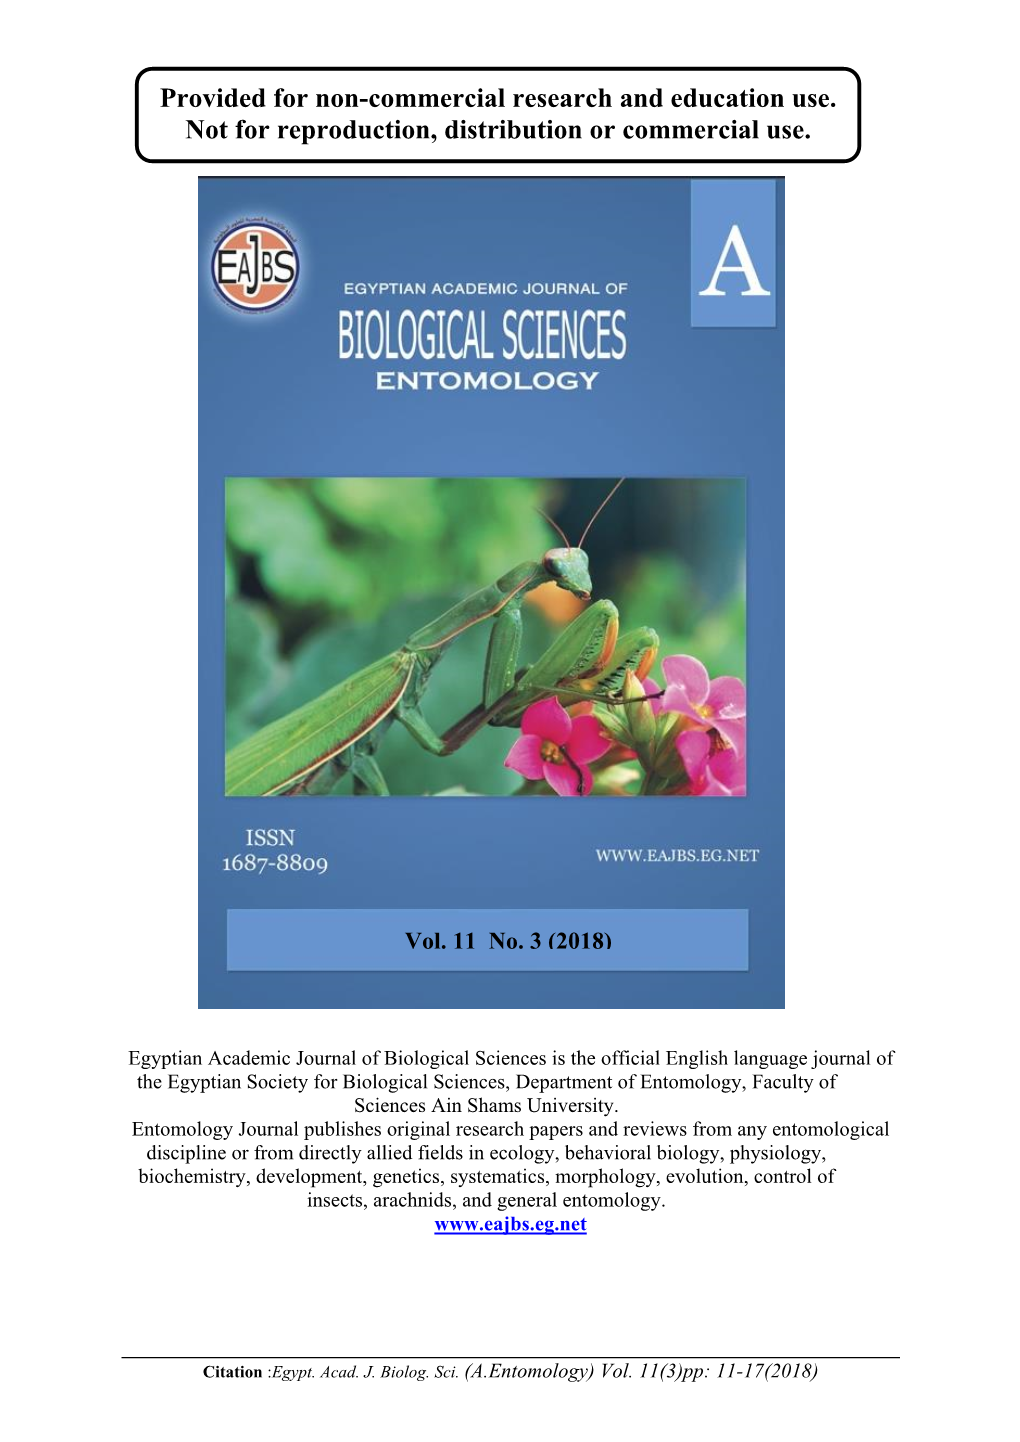 Diversity of Moths (Insecta: Lepidoptera) in the Gupteswarproposed Reserve Forest of the Eastern Ghathill,Koraput, Odisha, India: a Preliminary Study